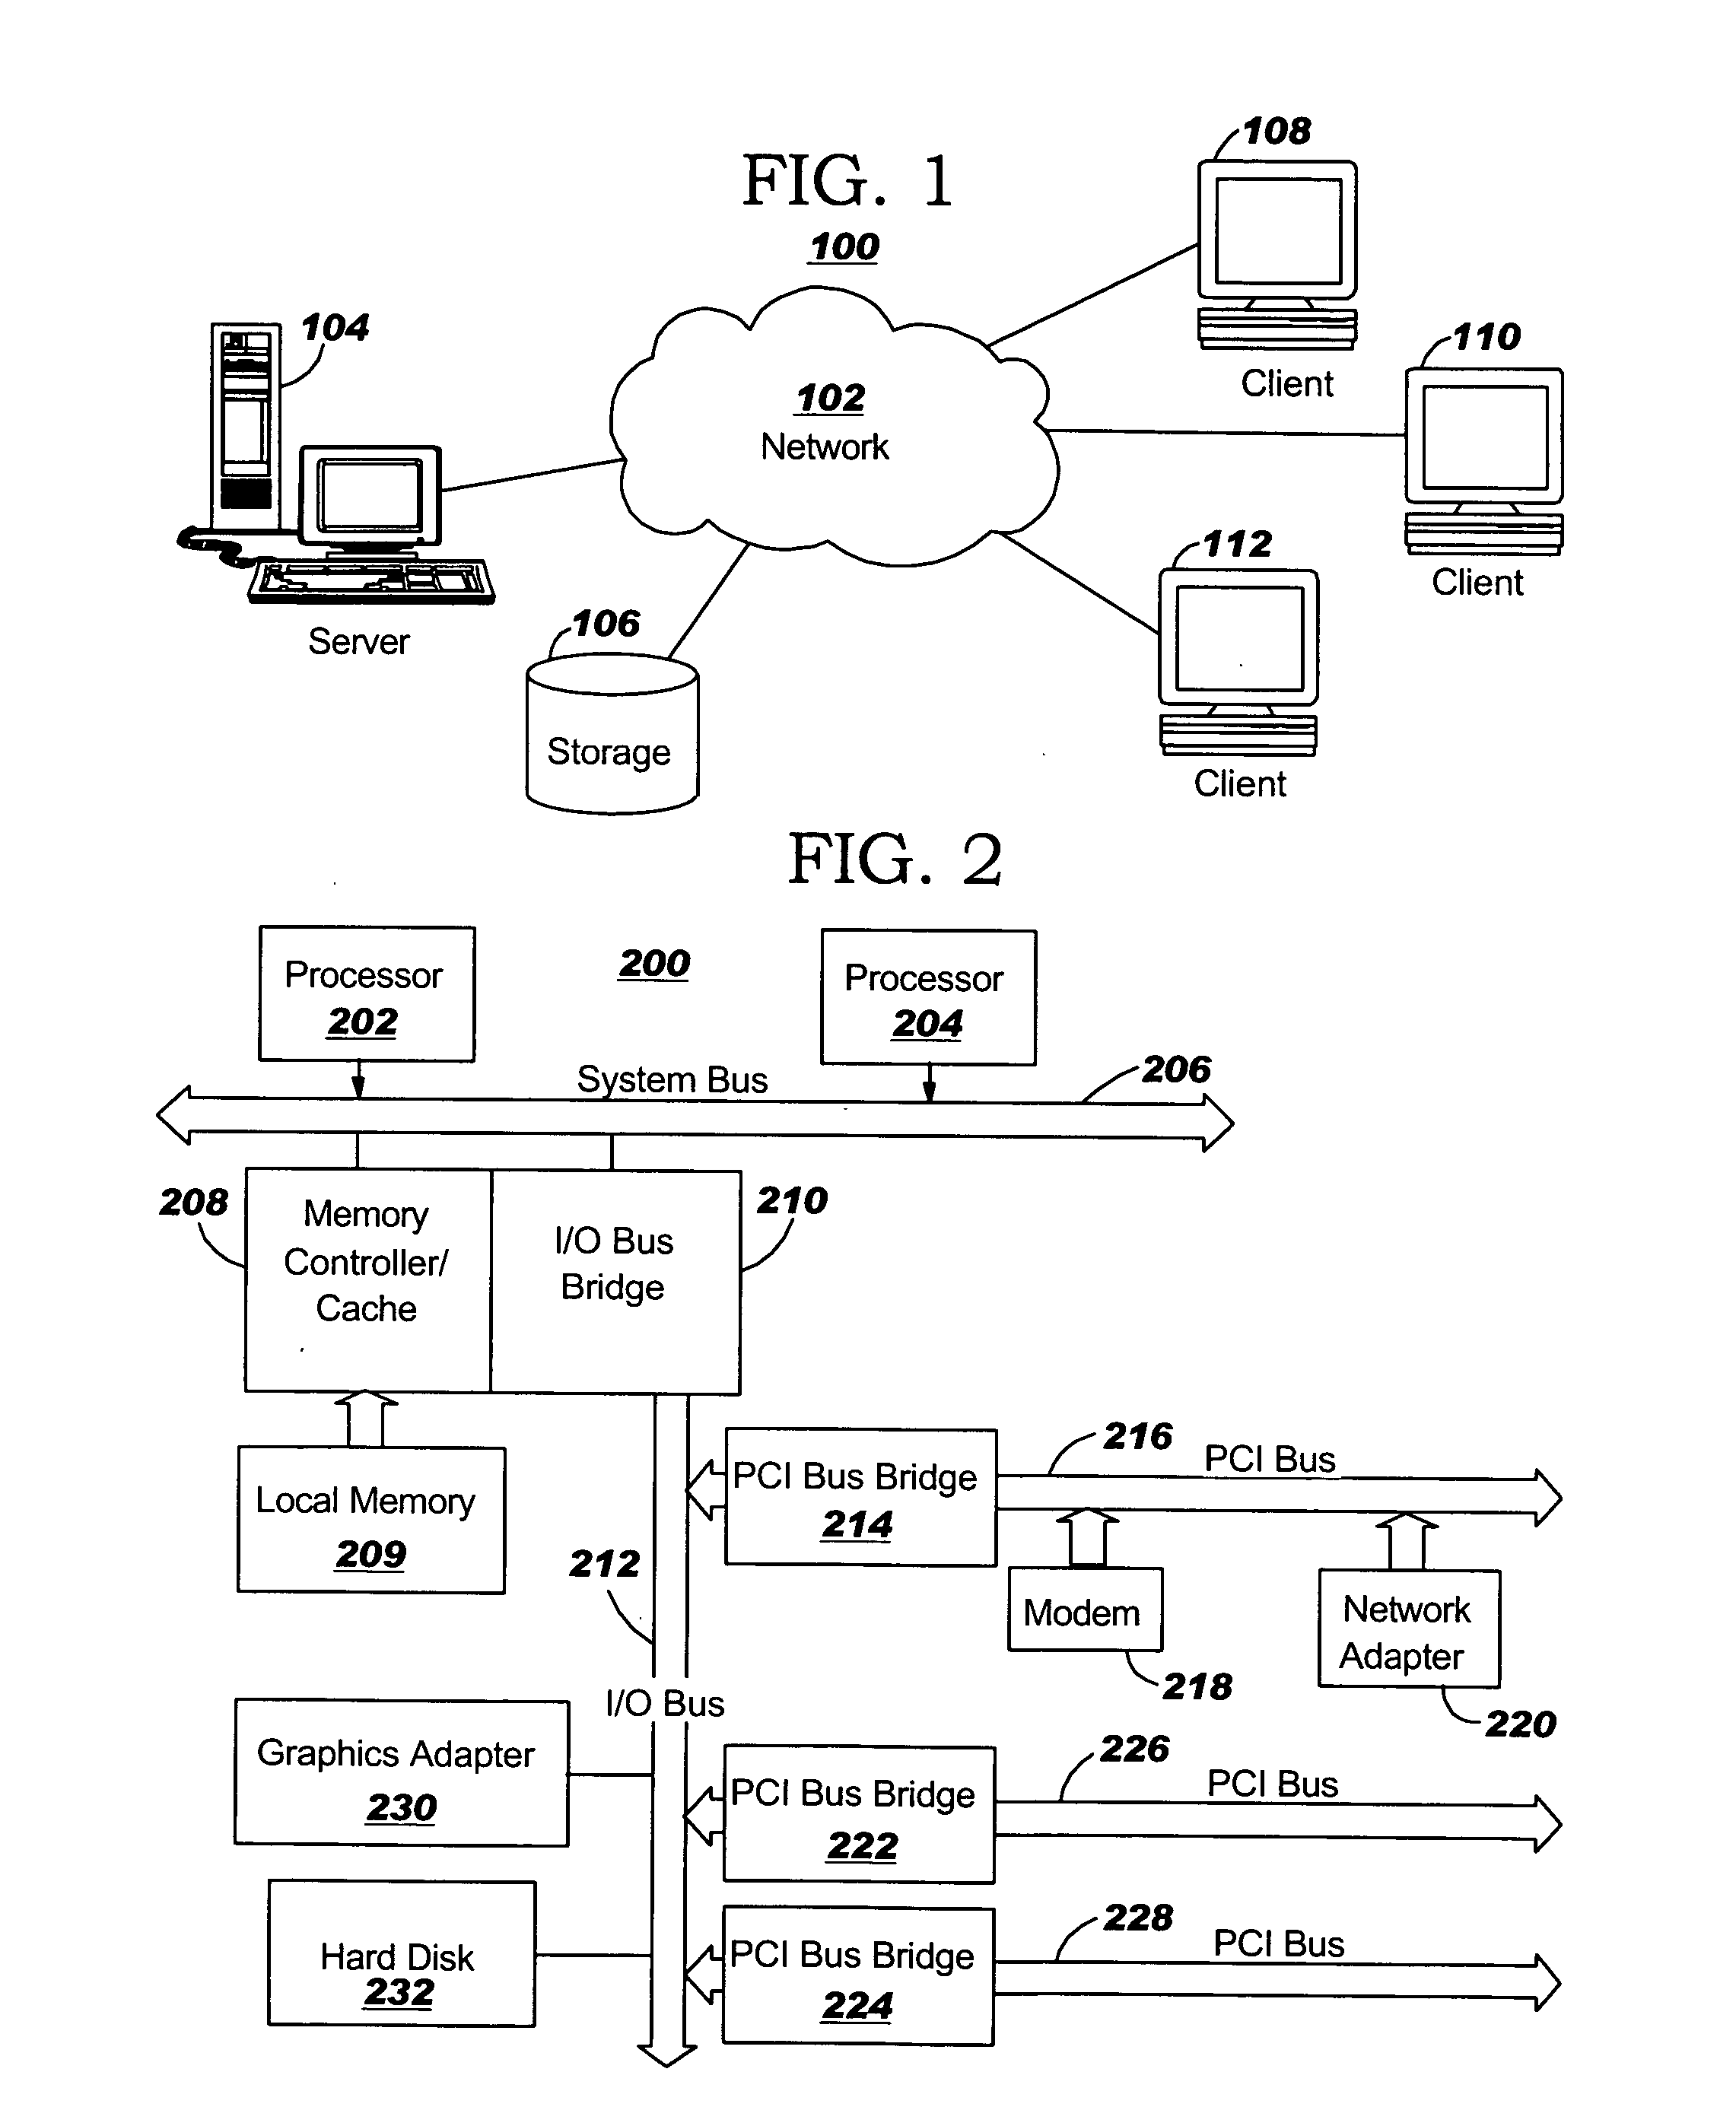 Method to effectively collect data from systems that consists of dynamic sub-systems